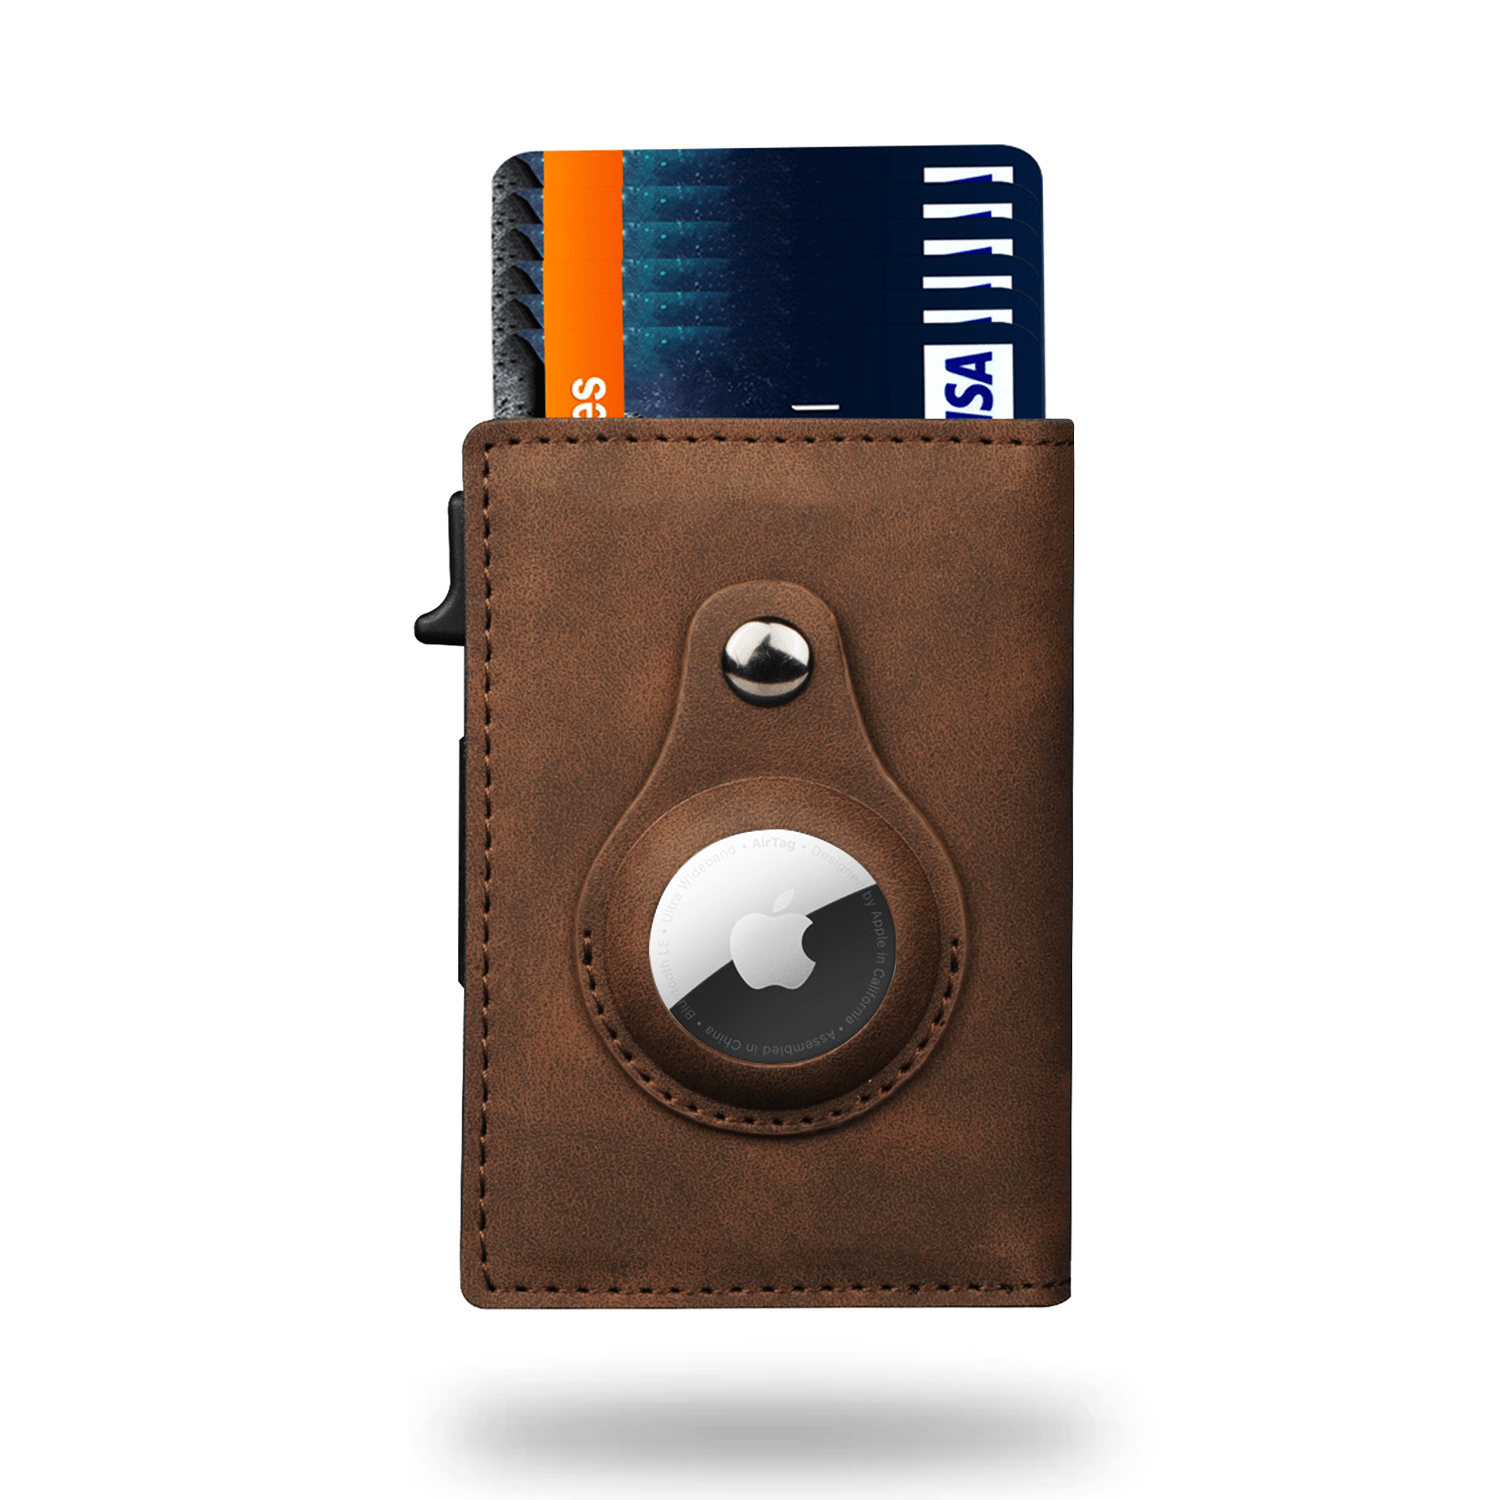 The Executive™  AirTag Wallet Gift Pack